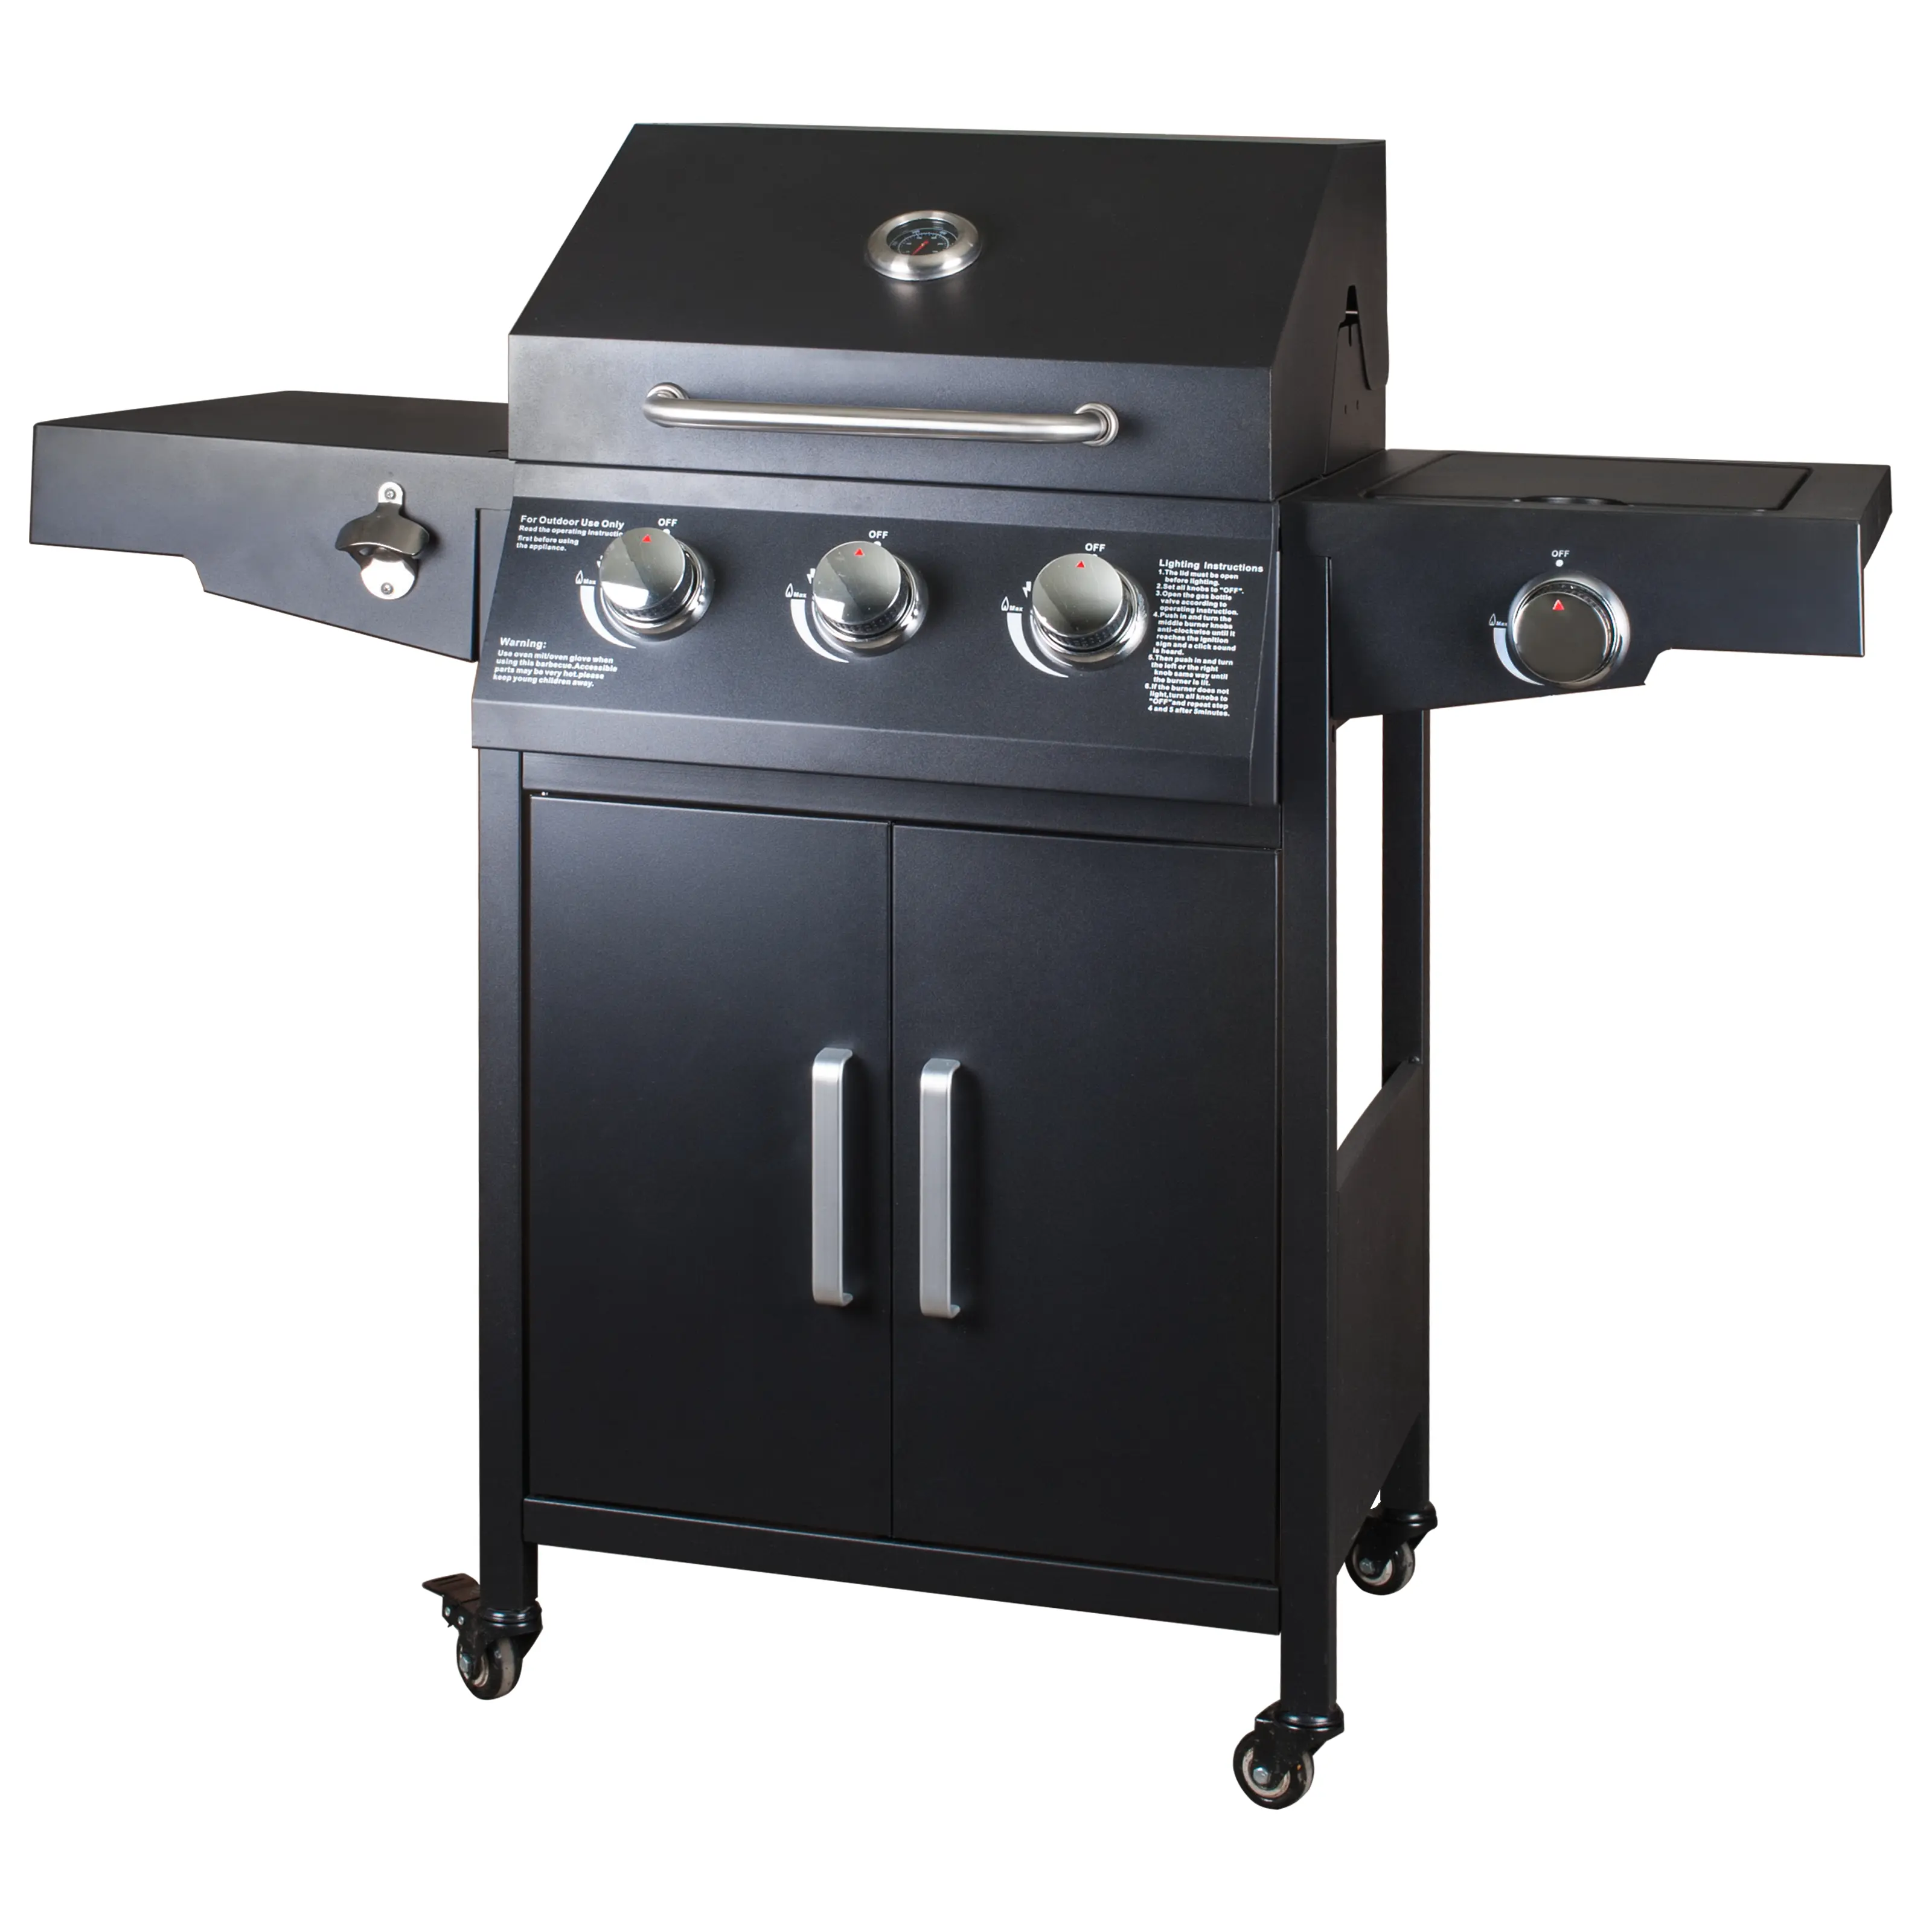 Backyard Outdoor with Side burner Steel Metal Round Top BBQ Barbecue Gas Grills Propane Movable